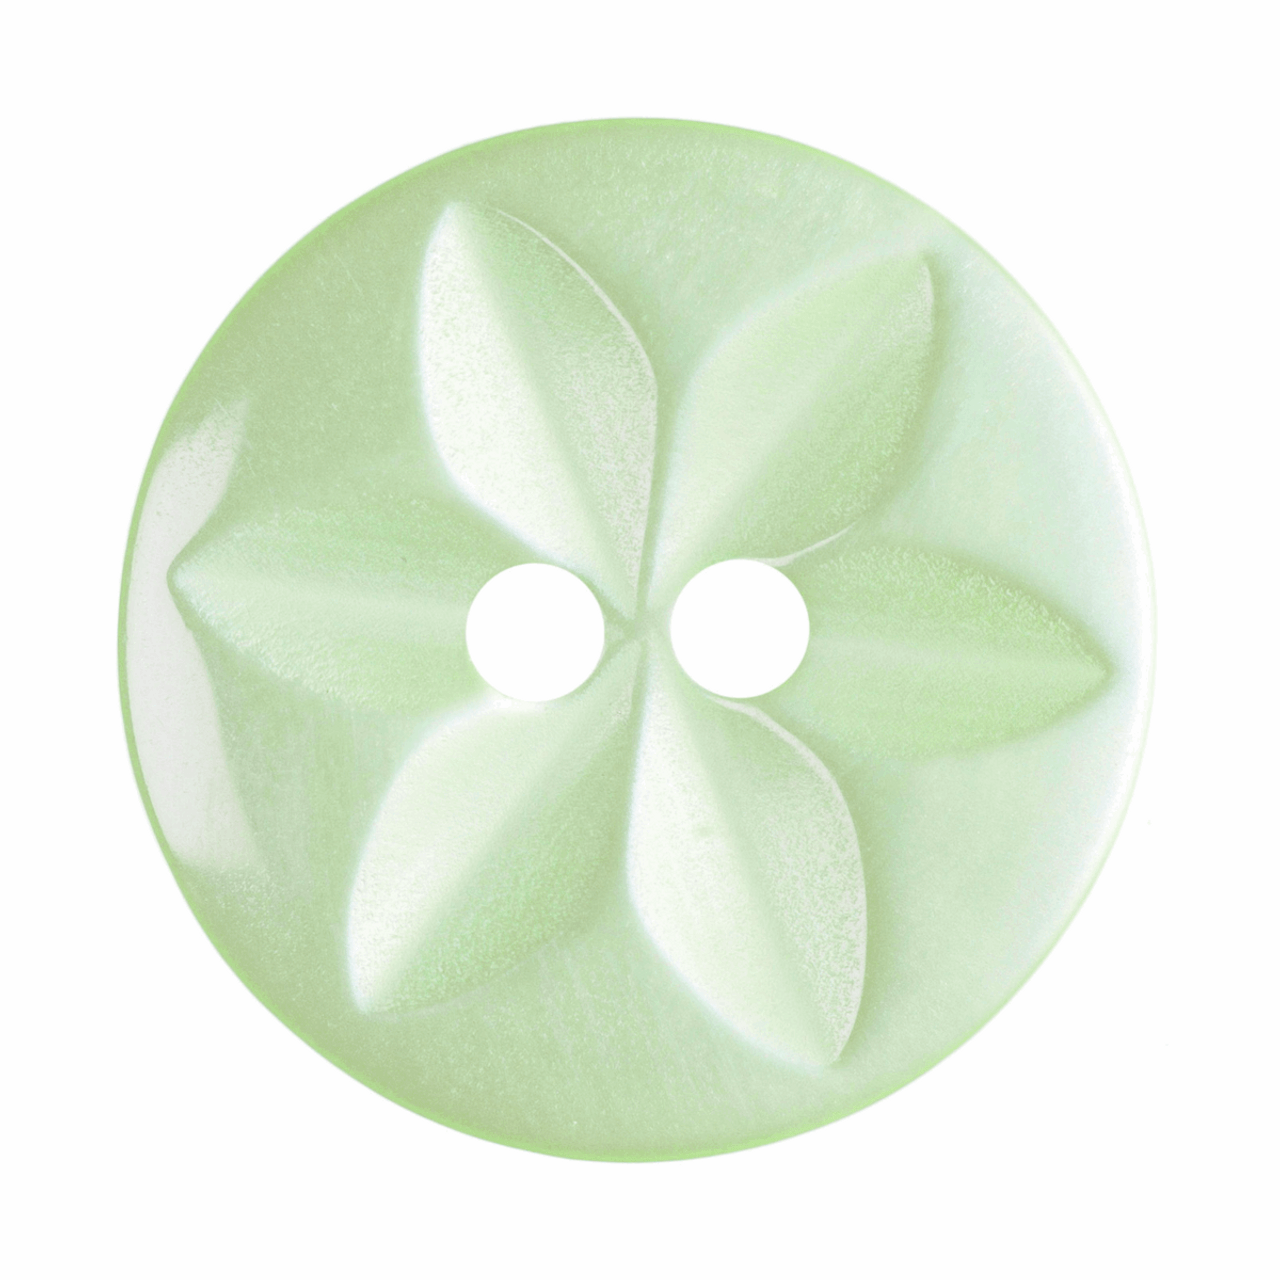 Pale Green Star Button, 16mm (5/8in) Diameter (Sold Individually)